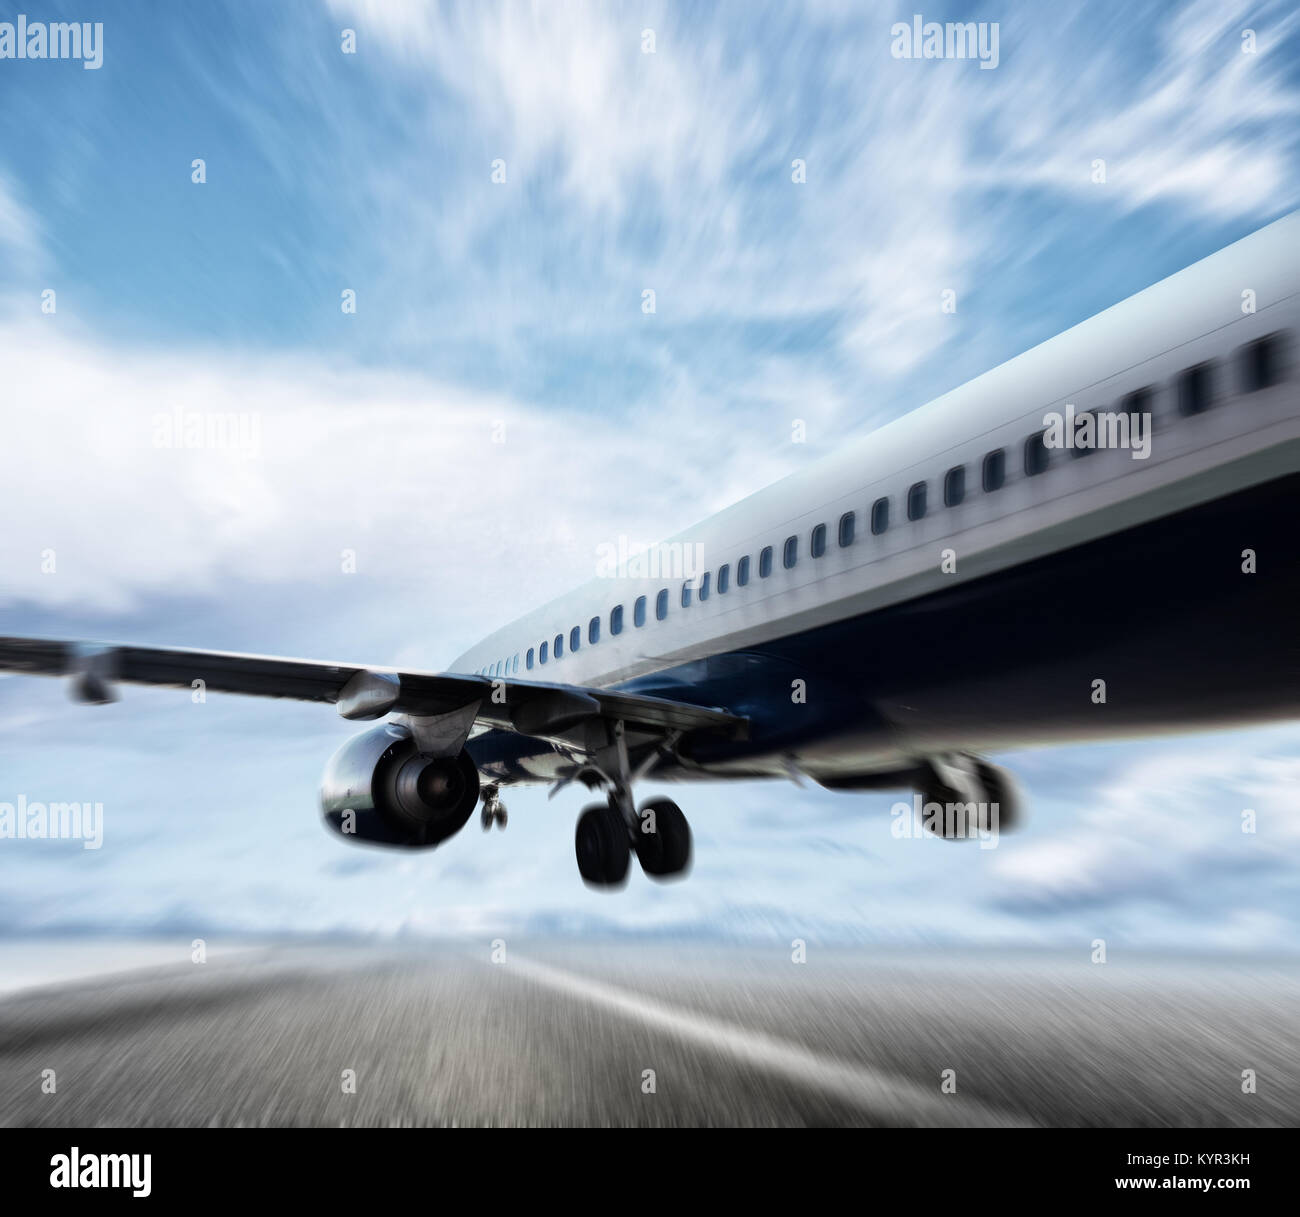 Aircraft taking off on a runway Stock Photo